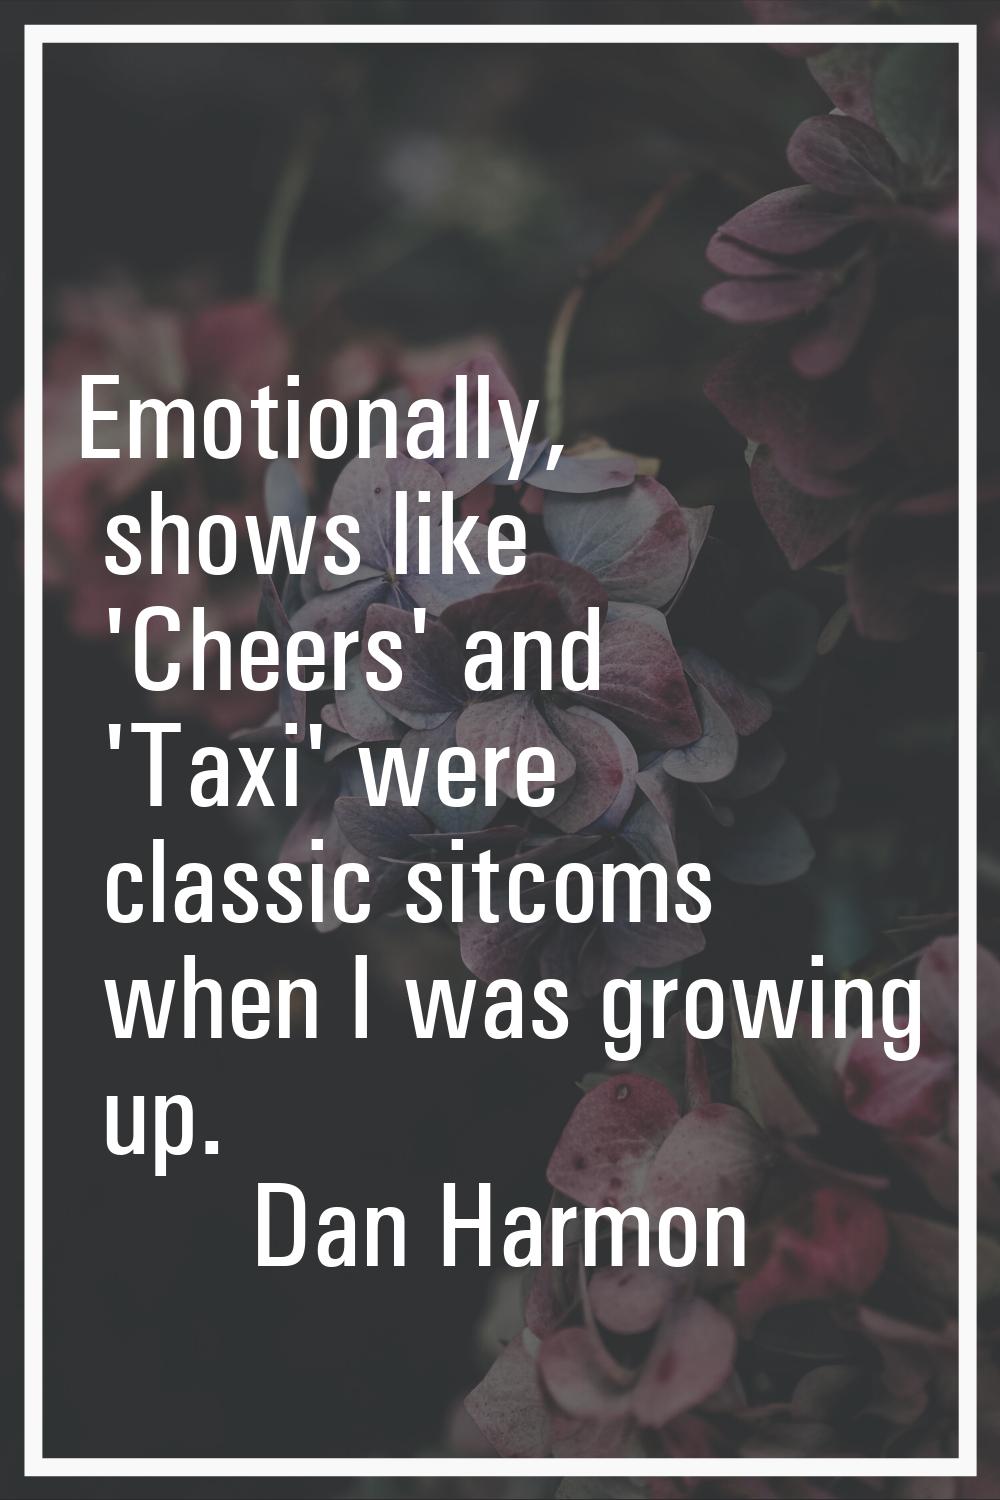 Emotionally, shows like 'Cheers' and 'Taxi' were classic sitcoms when I was growing up.